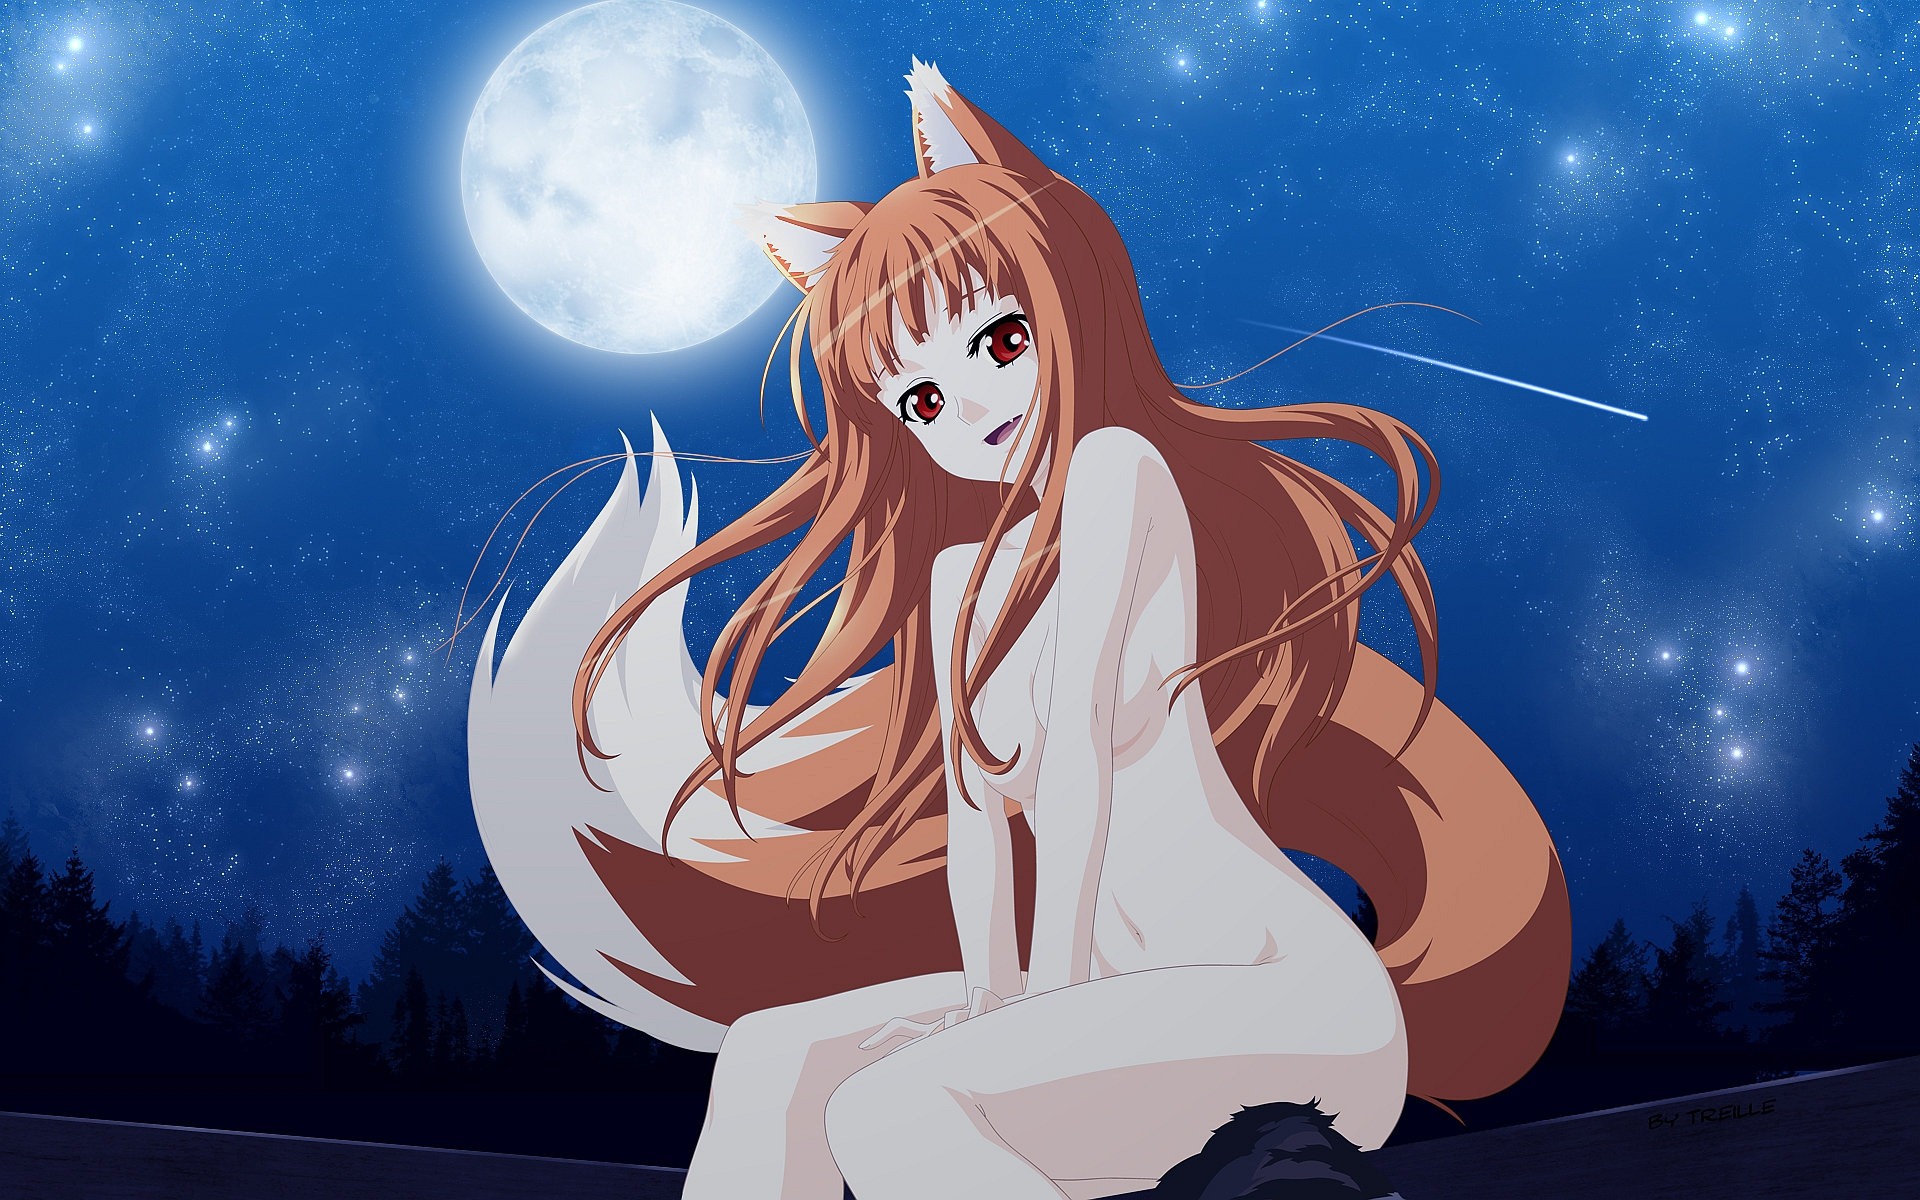 Spice and Wolf HD Wallpaper #7 - 1920x1200